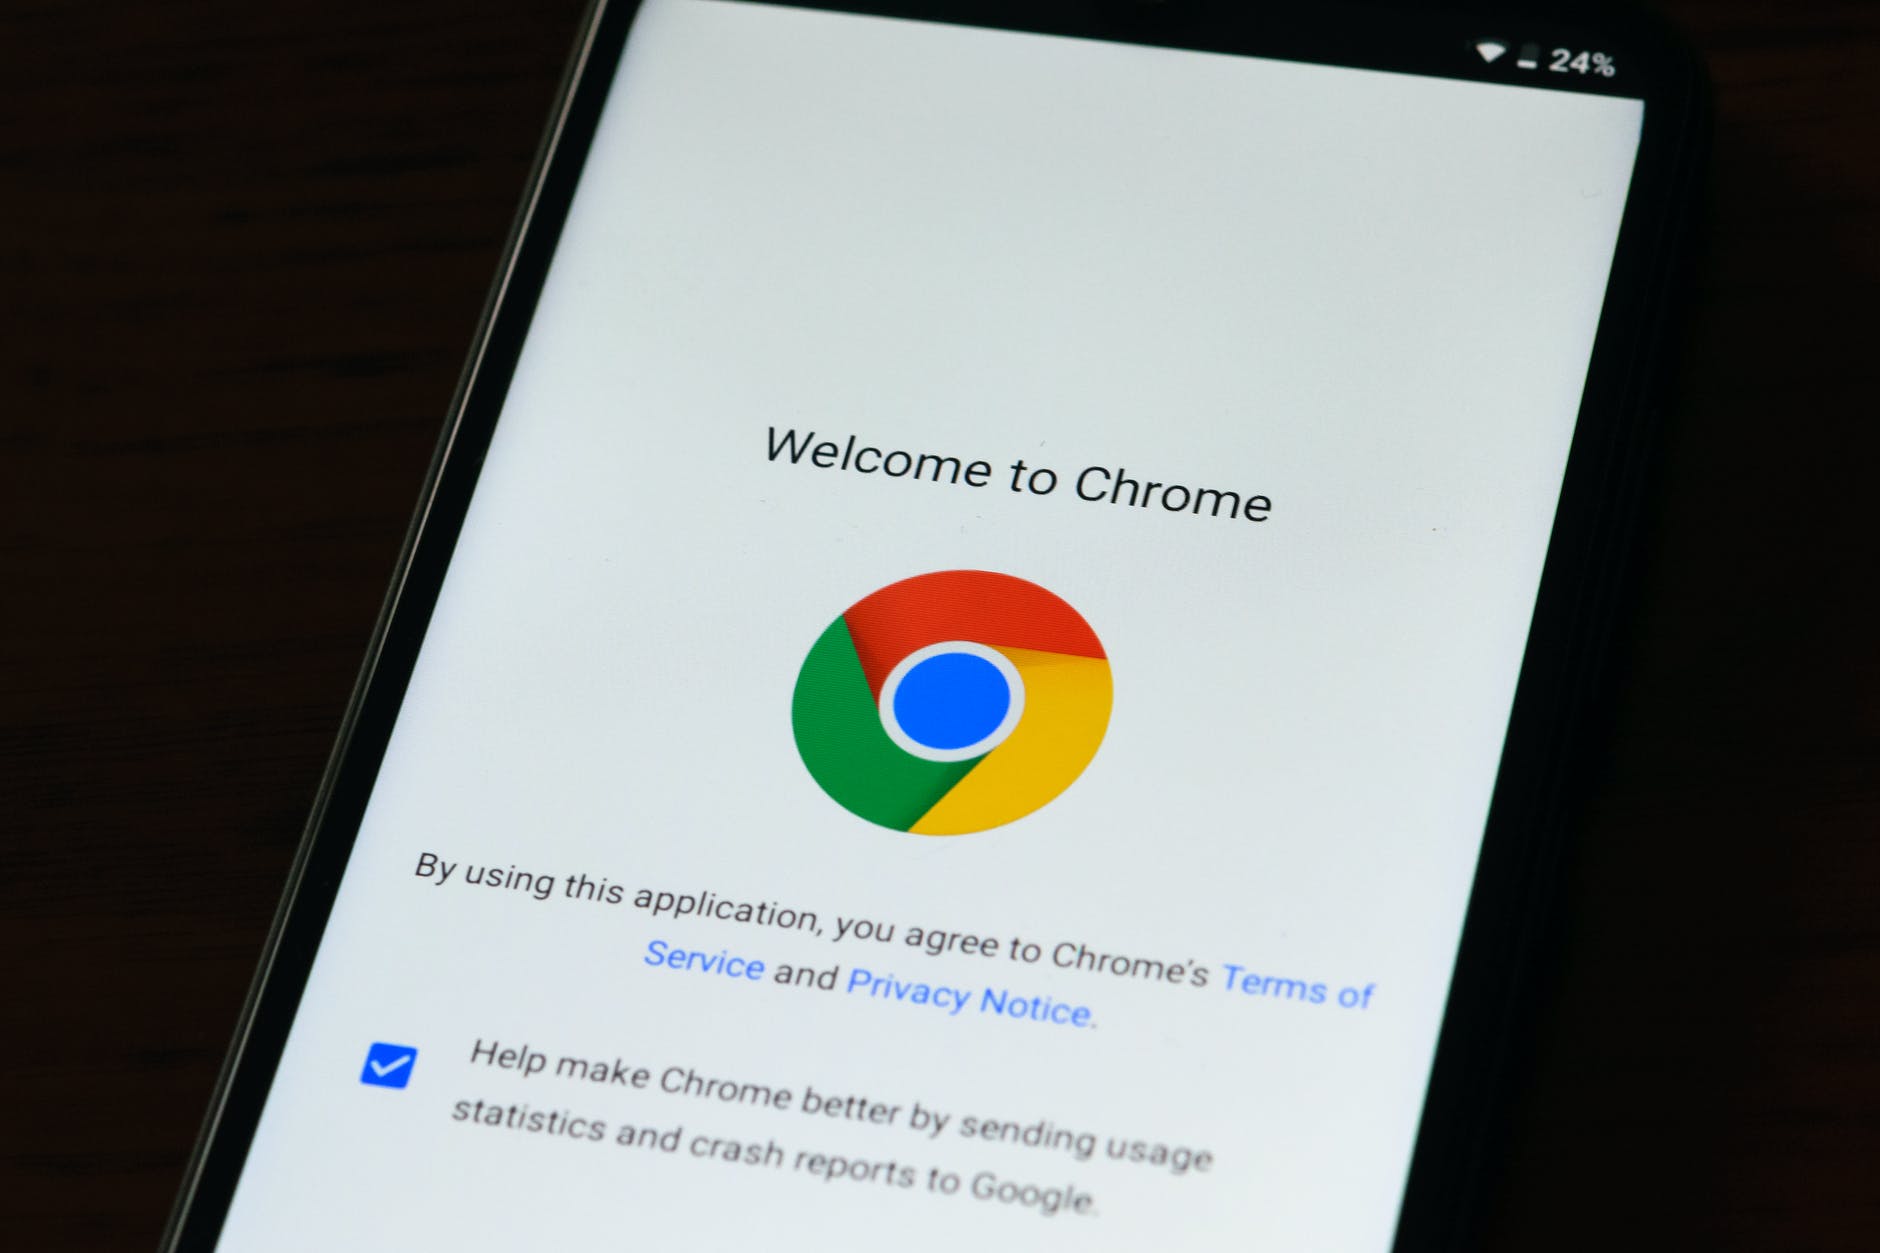 Chrome to soon block notifications from abusive, disruptive websites